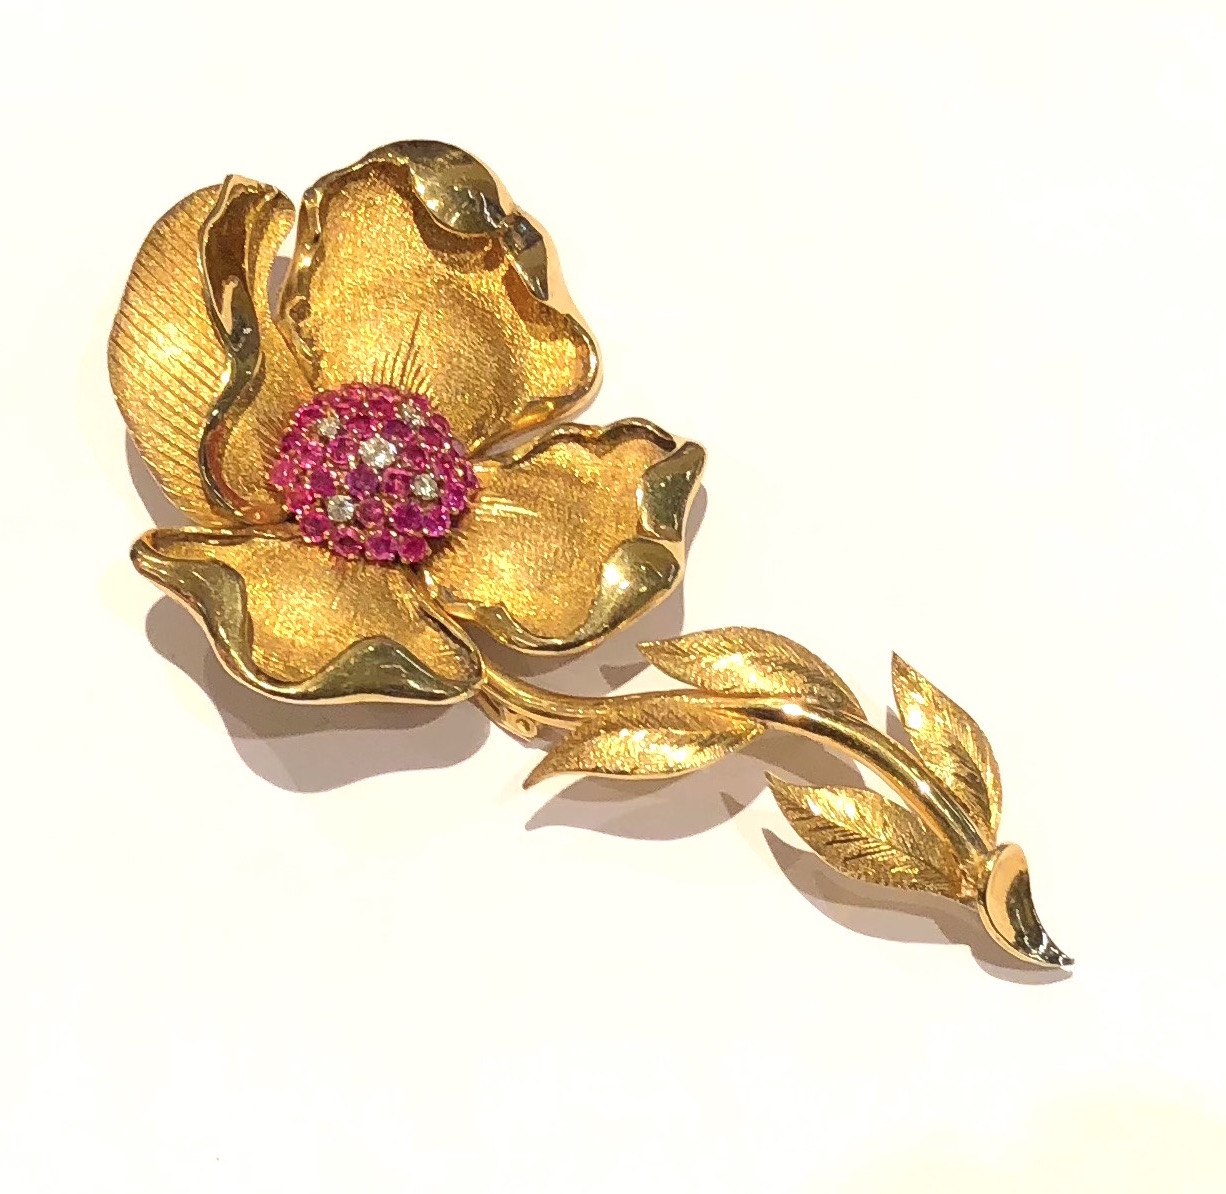 Flower blossom brooch in 18K textured and contoured gold set with 31 round cut rubies (approx. 3.50 carats) and 5 round cut diamonds (approx. 0.5 carat TW) c.1940’s